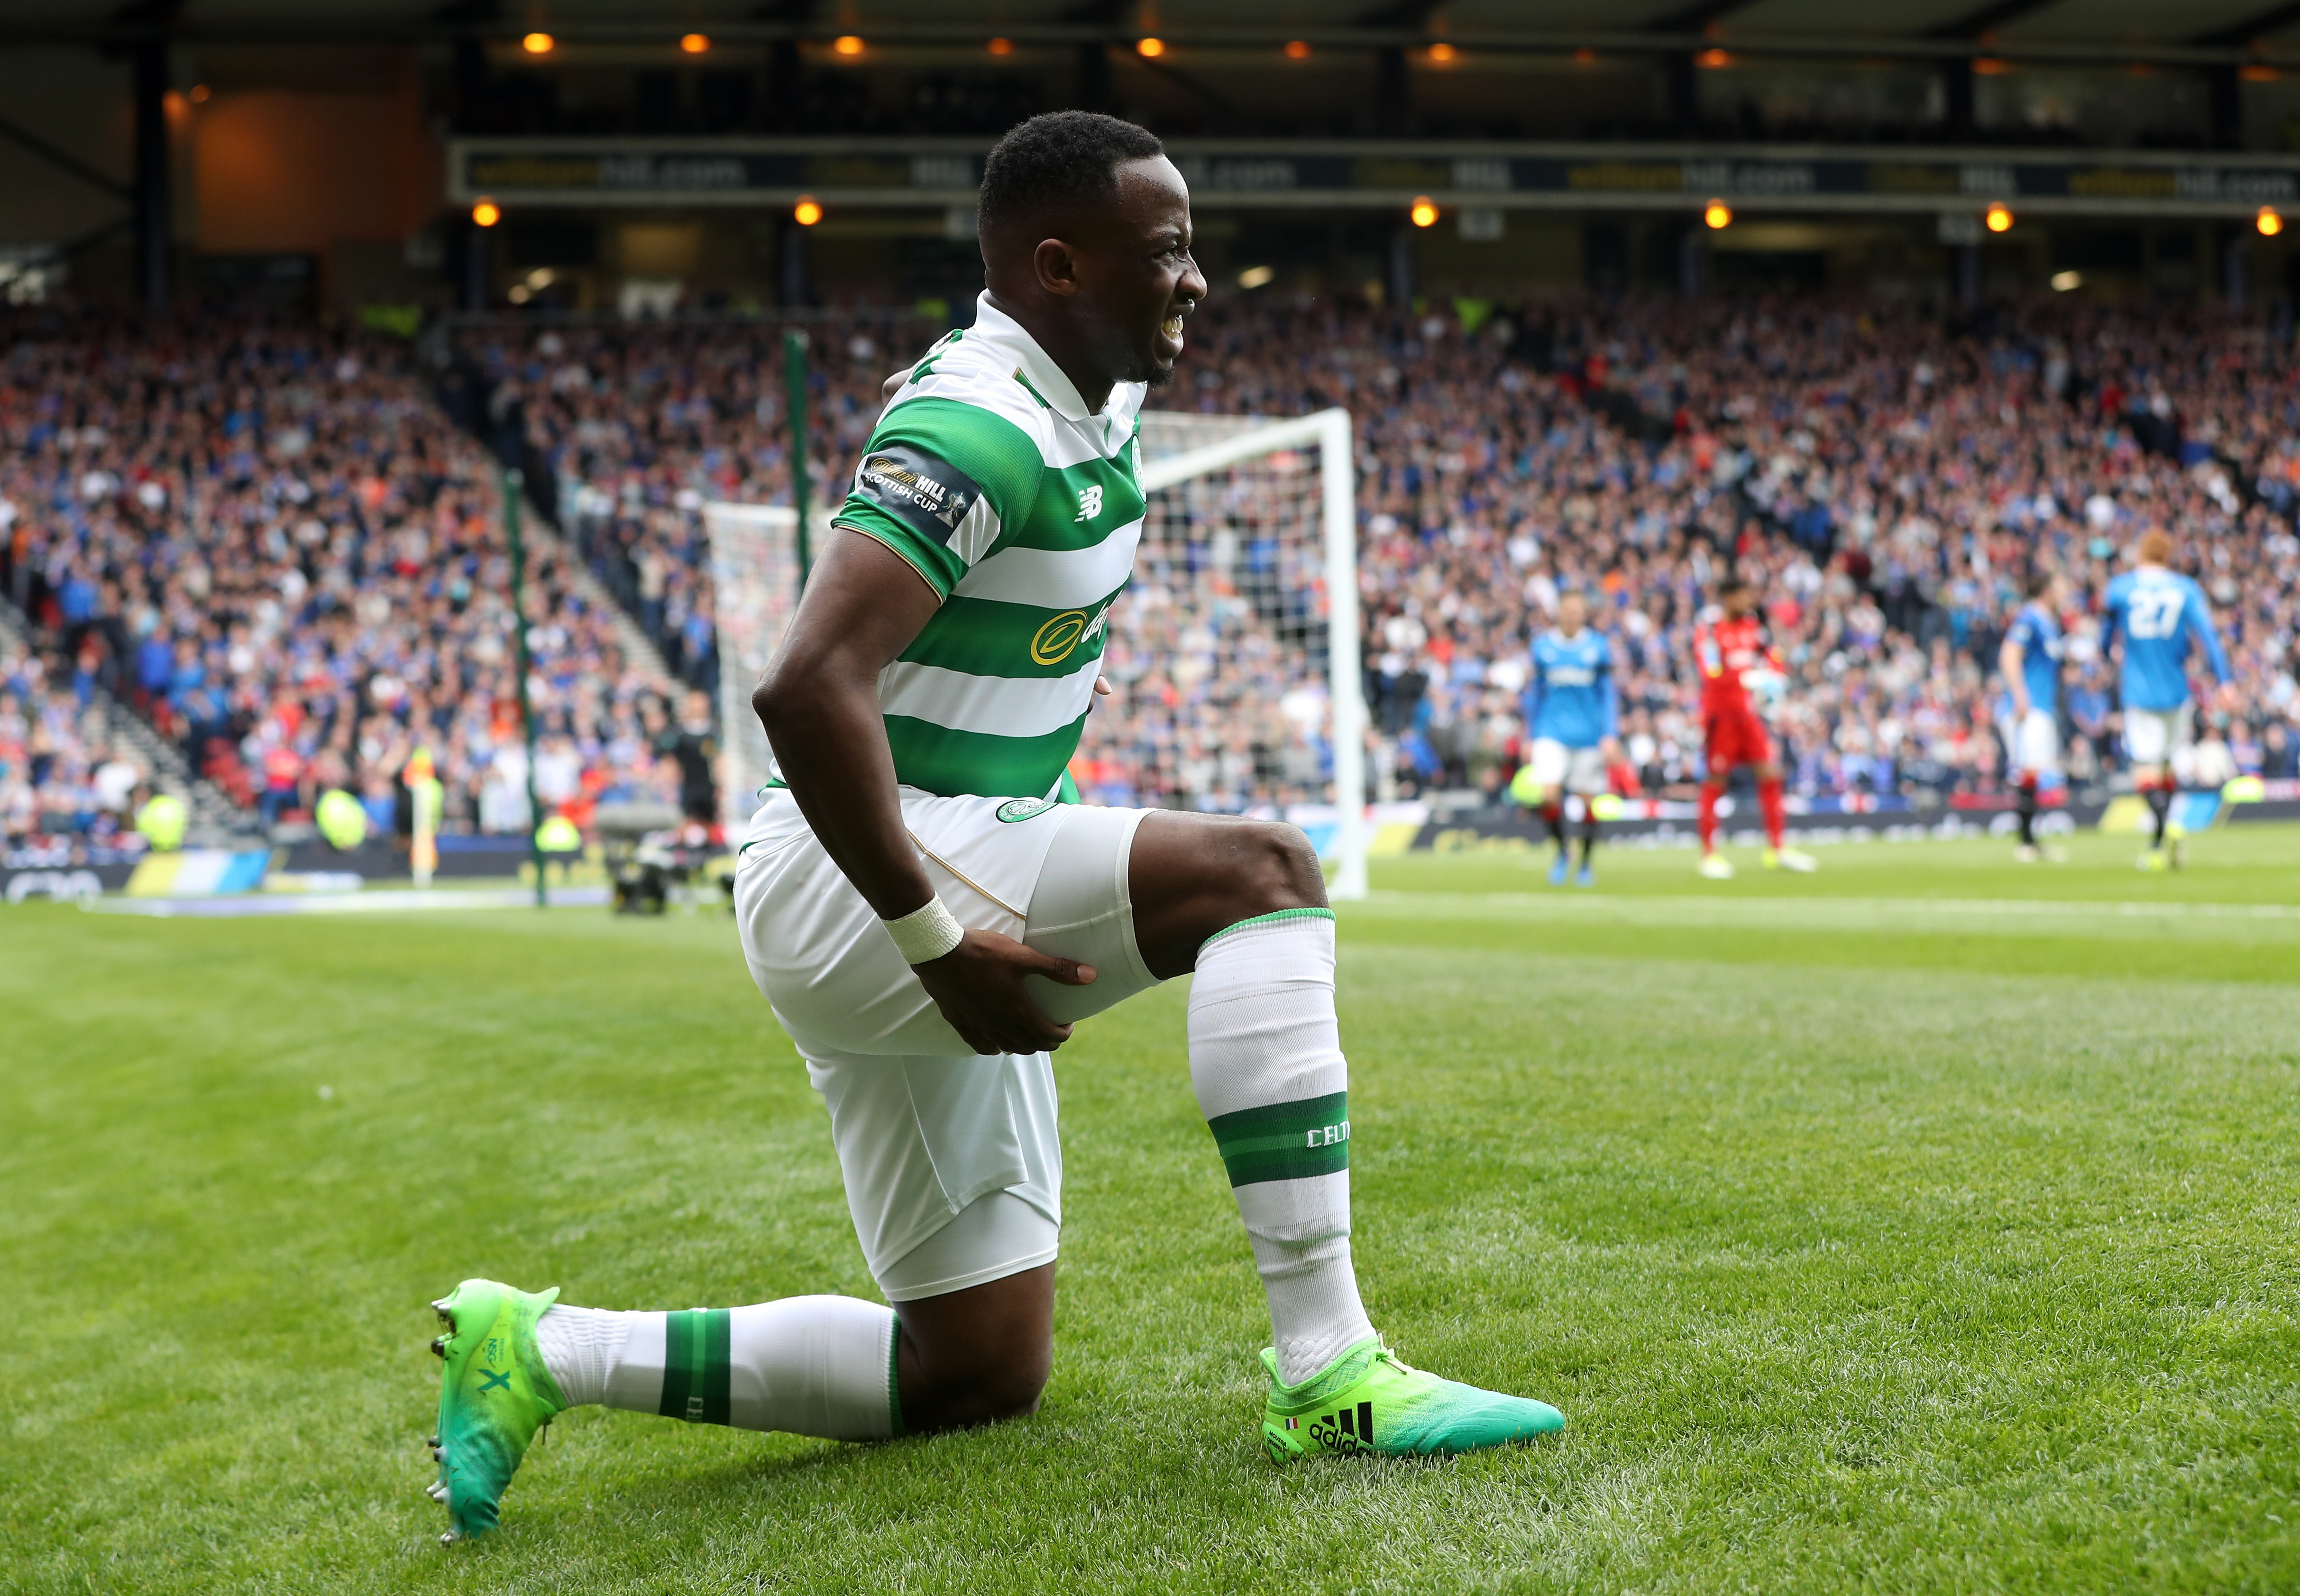 GLASGOW, SCOTLAND - APRIL 23:  Moussa Dembele of Celtic reacts after his injury during the Scottish Cup Semi-Final match between Celtic and Rangers at Hampden Park on April 23, 2017 in Glasgow, Scotland.  (Photo by Ian MacNicol/Getty Images)